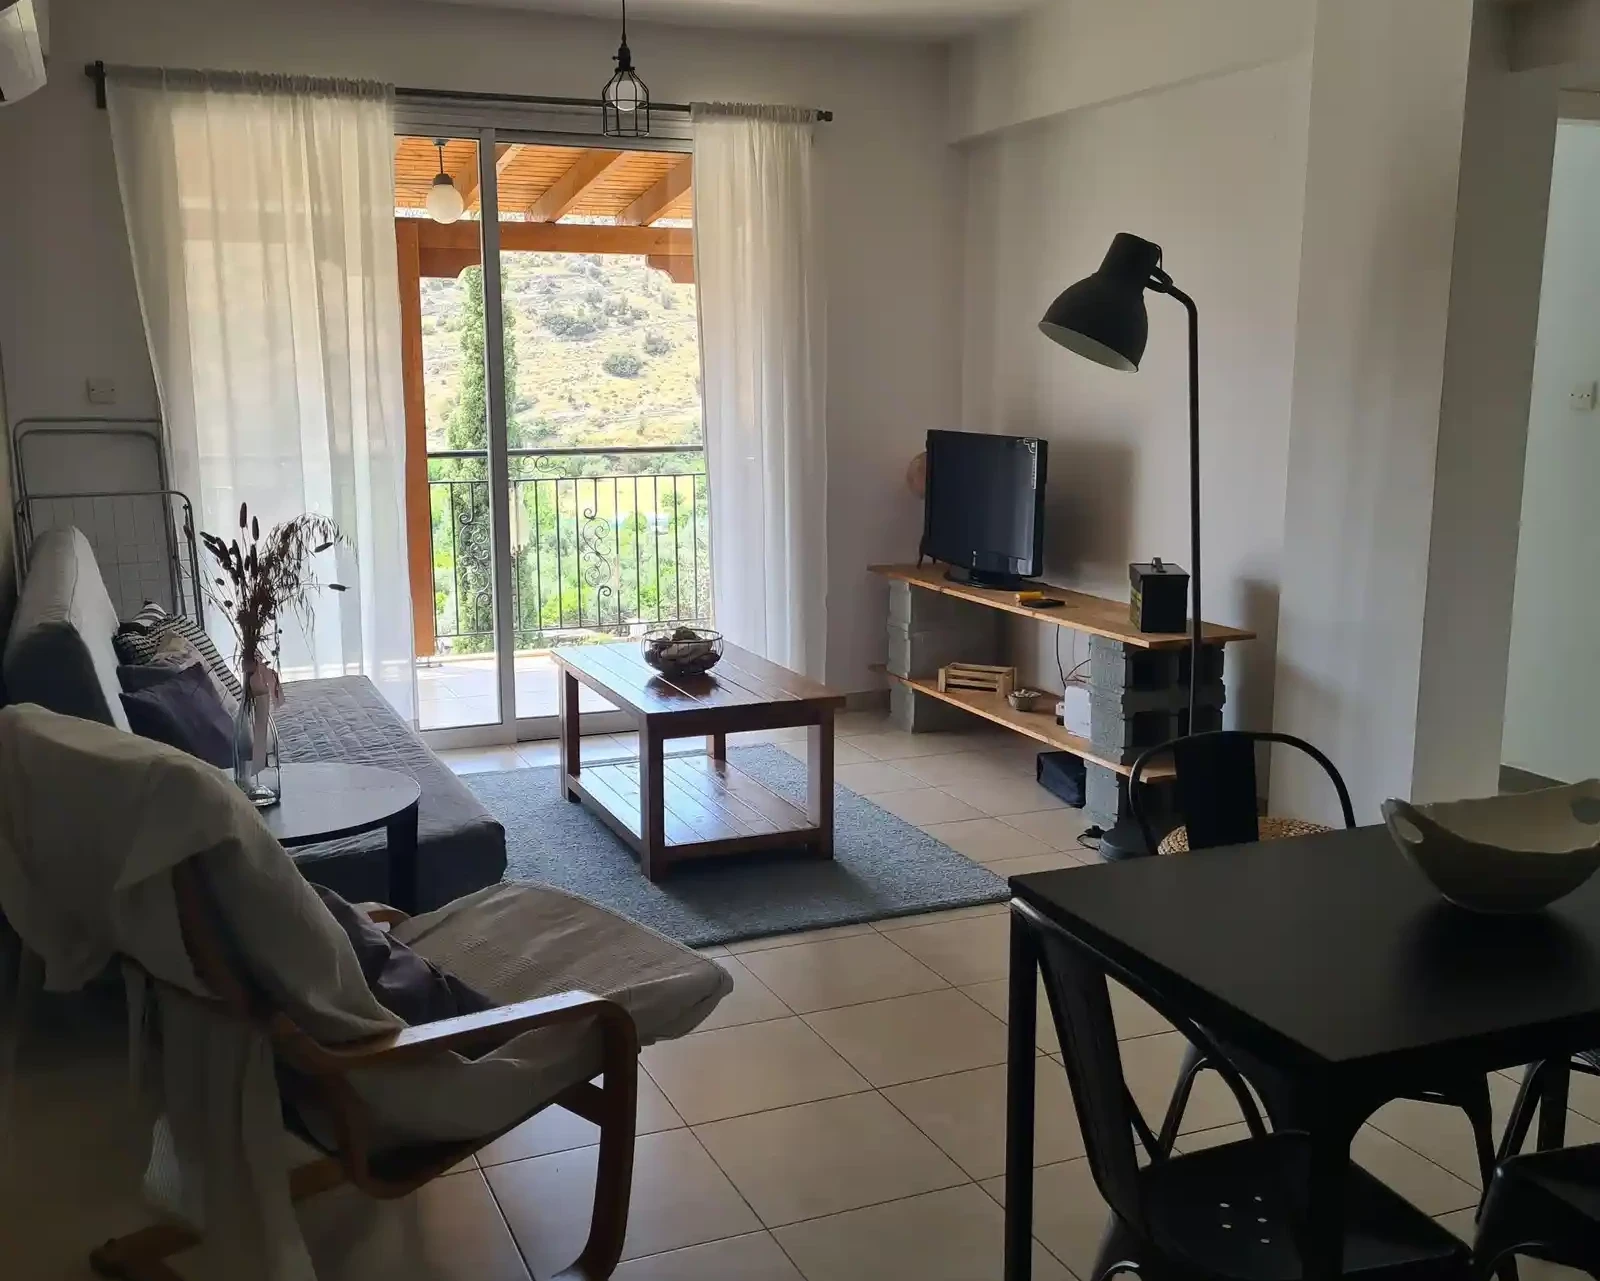 1-bedroom apartment fоr sаle €210.000, image 1